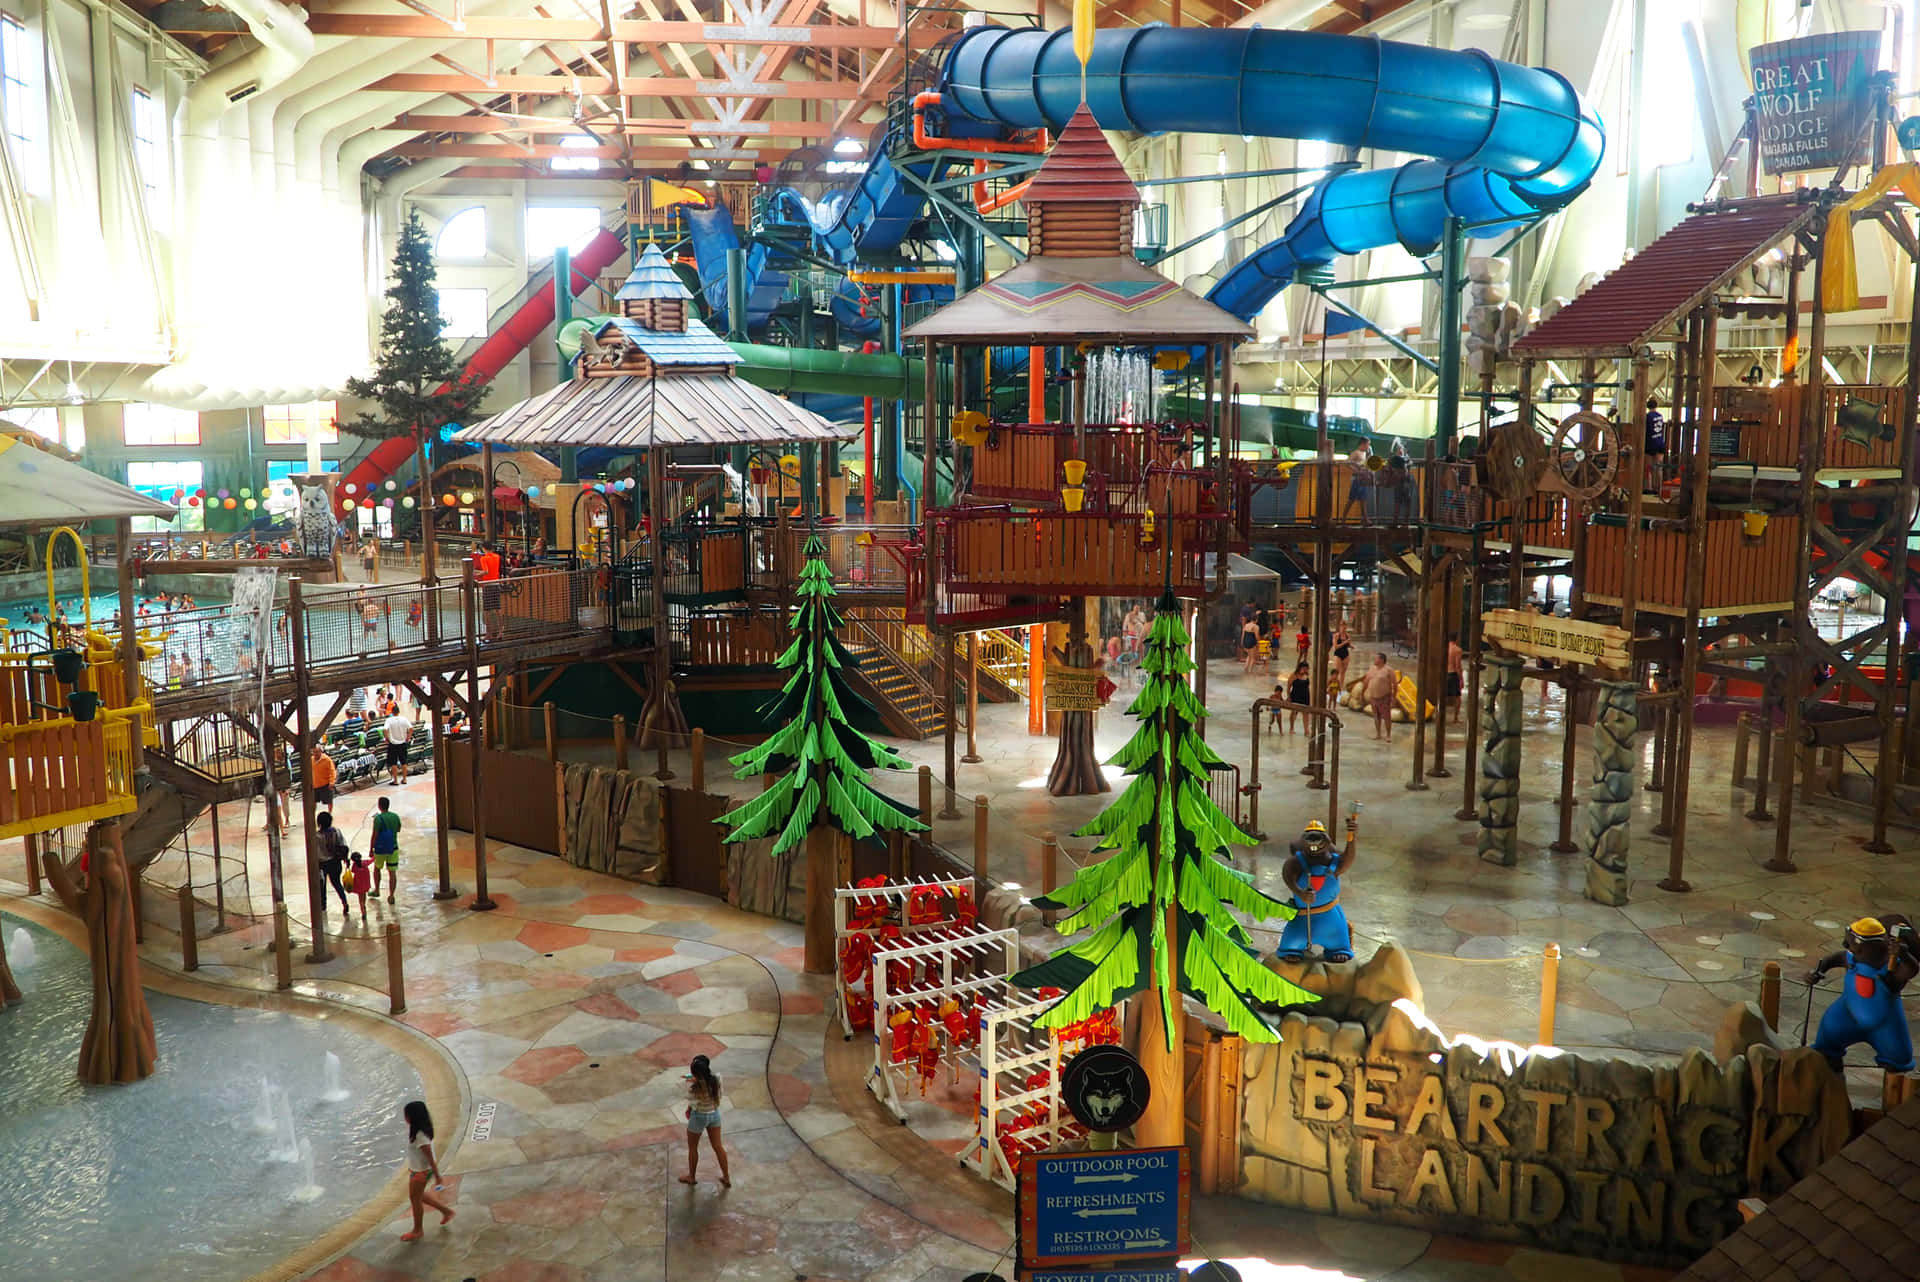 A Large Indoor Water Park With Many Slides And Water Slides